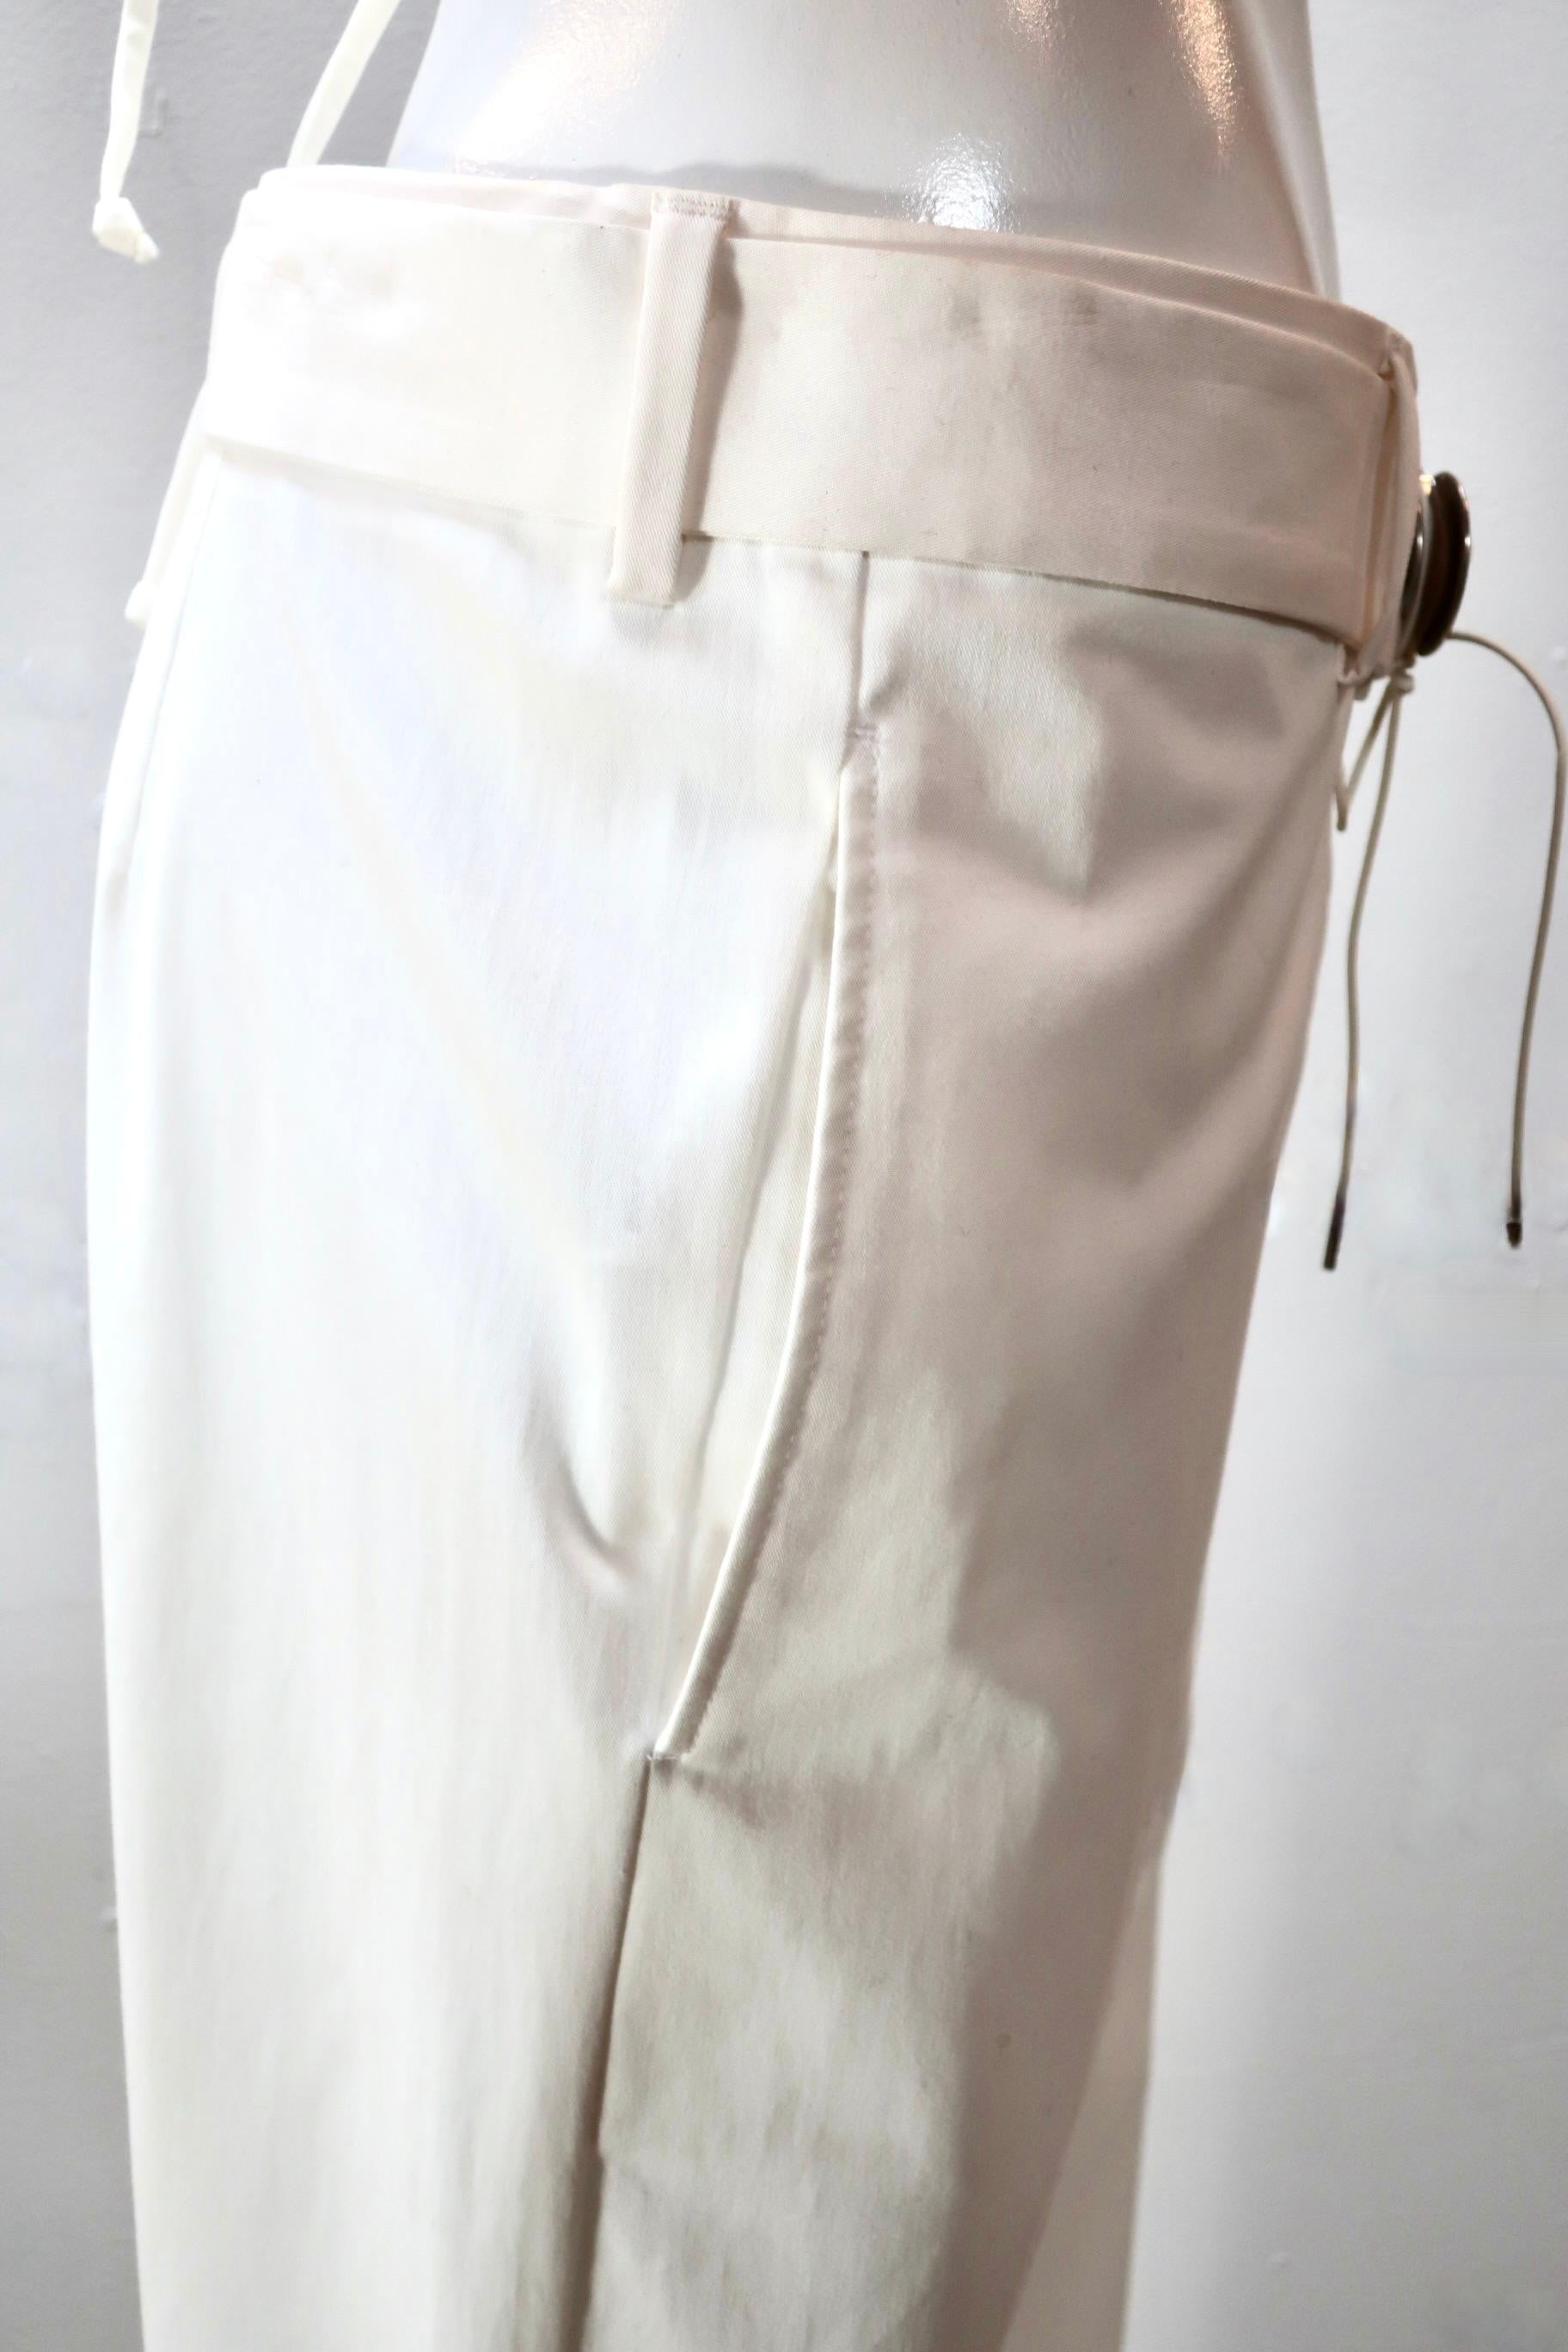 Maison Martin Margiela Belted Straight Pant In New Condition For Sale In Laguna Beach, CA